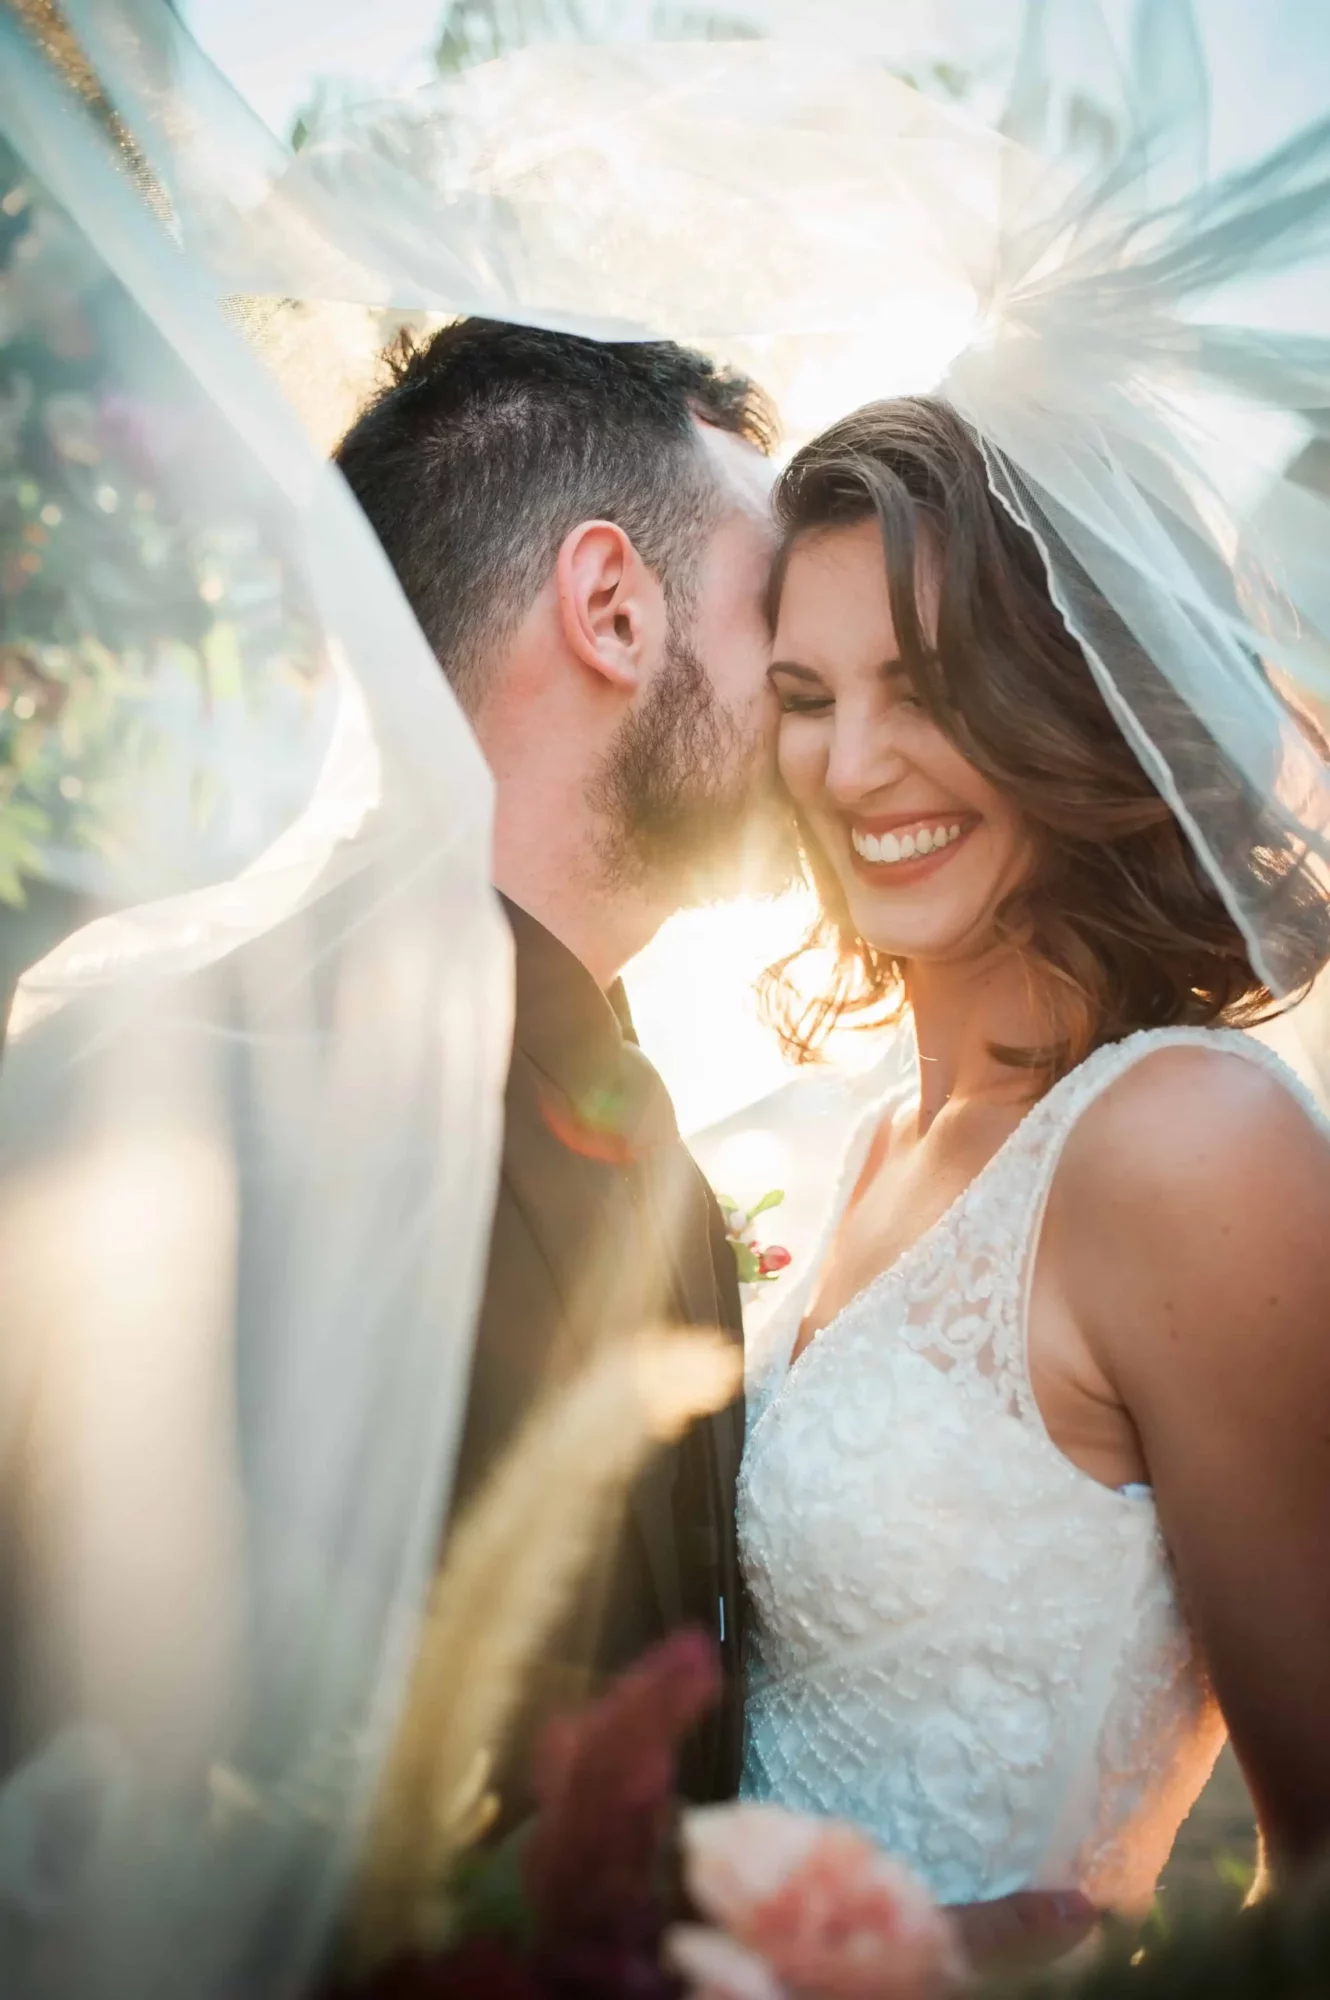 Groom whispers in bride's ear and making her laugh all while under the veil and the sun shinning through. Couple posing for a Bakersfield wedding photographer.